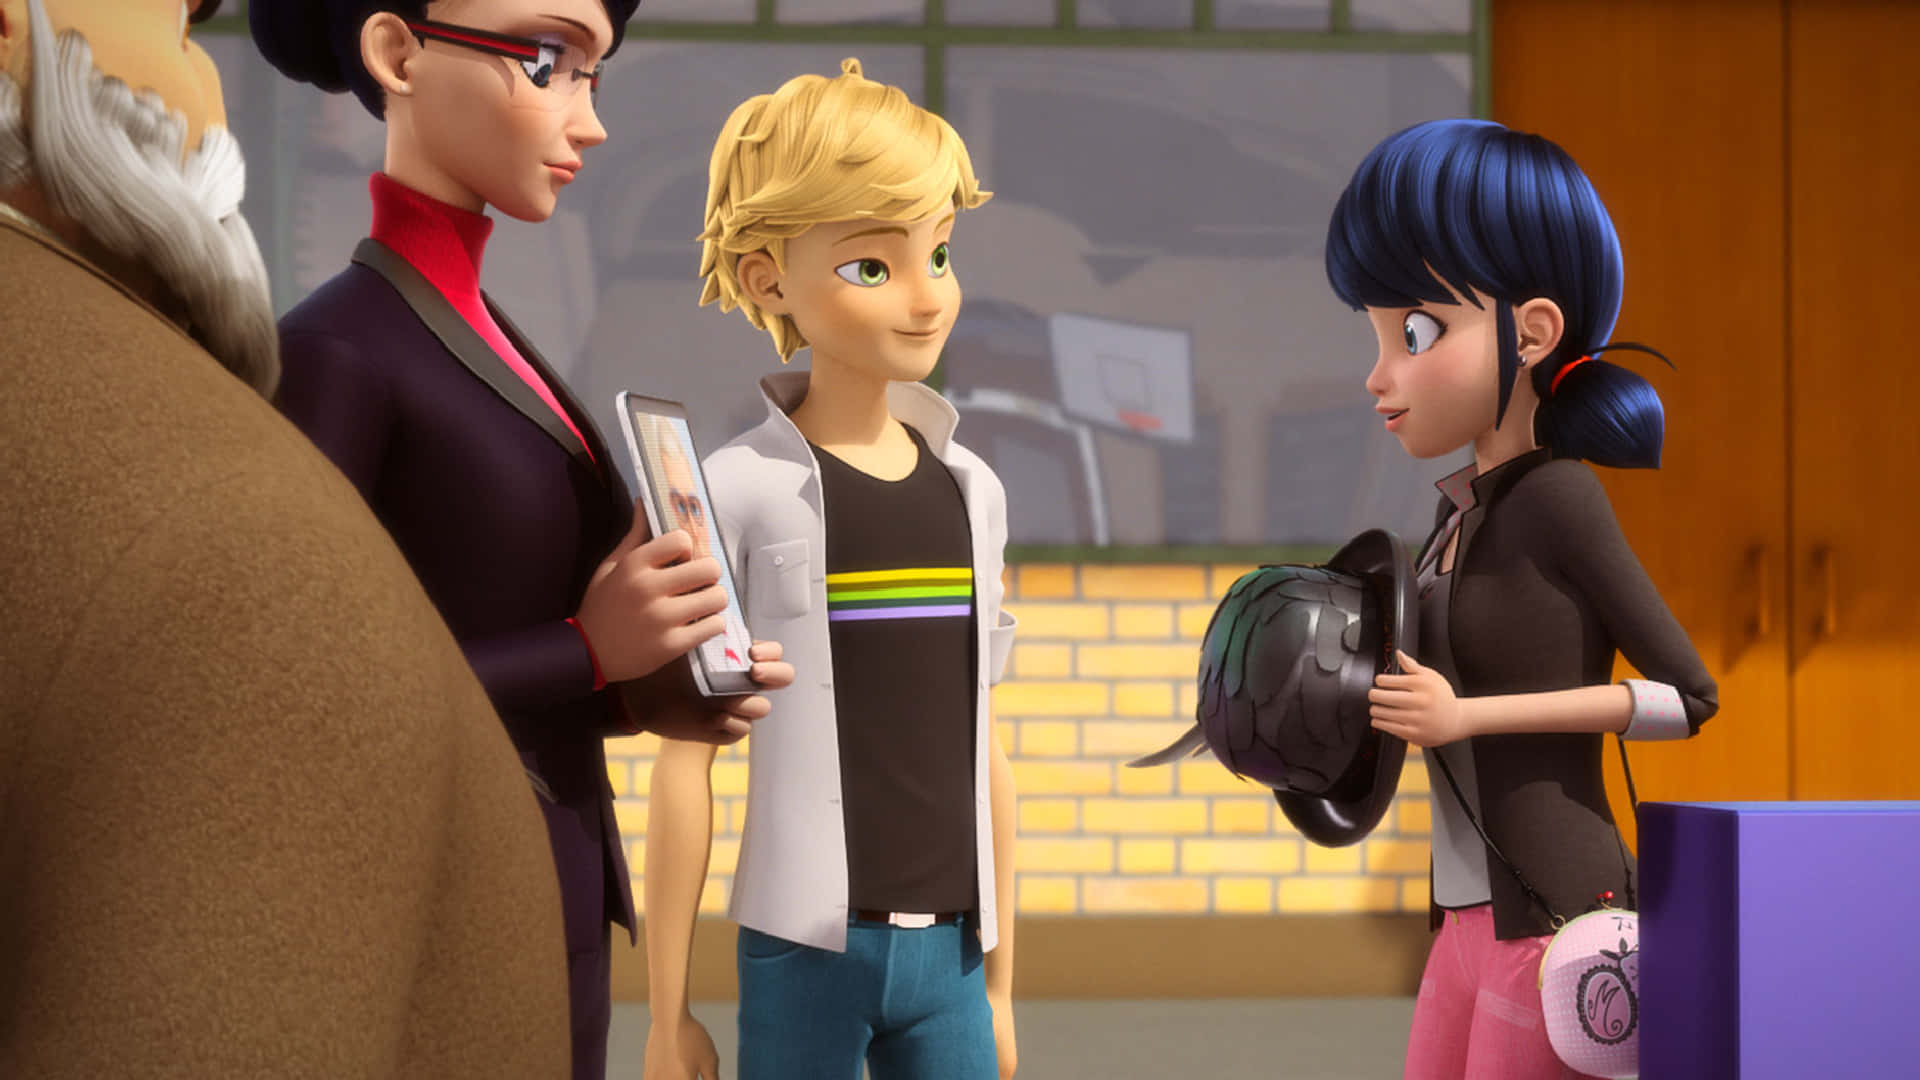 Adrien from Miraculous Ladybug Looks Up, Ready For Action Wallpaper